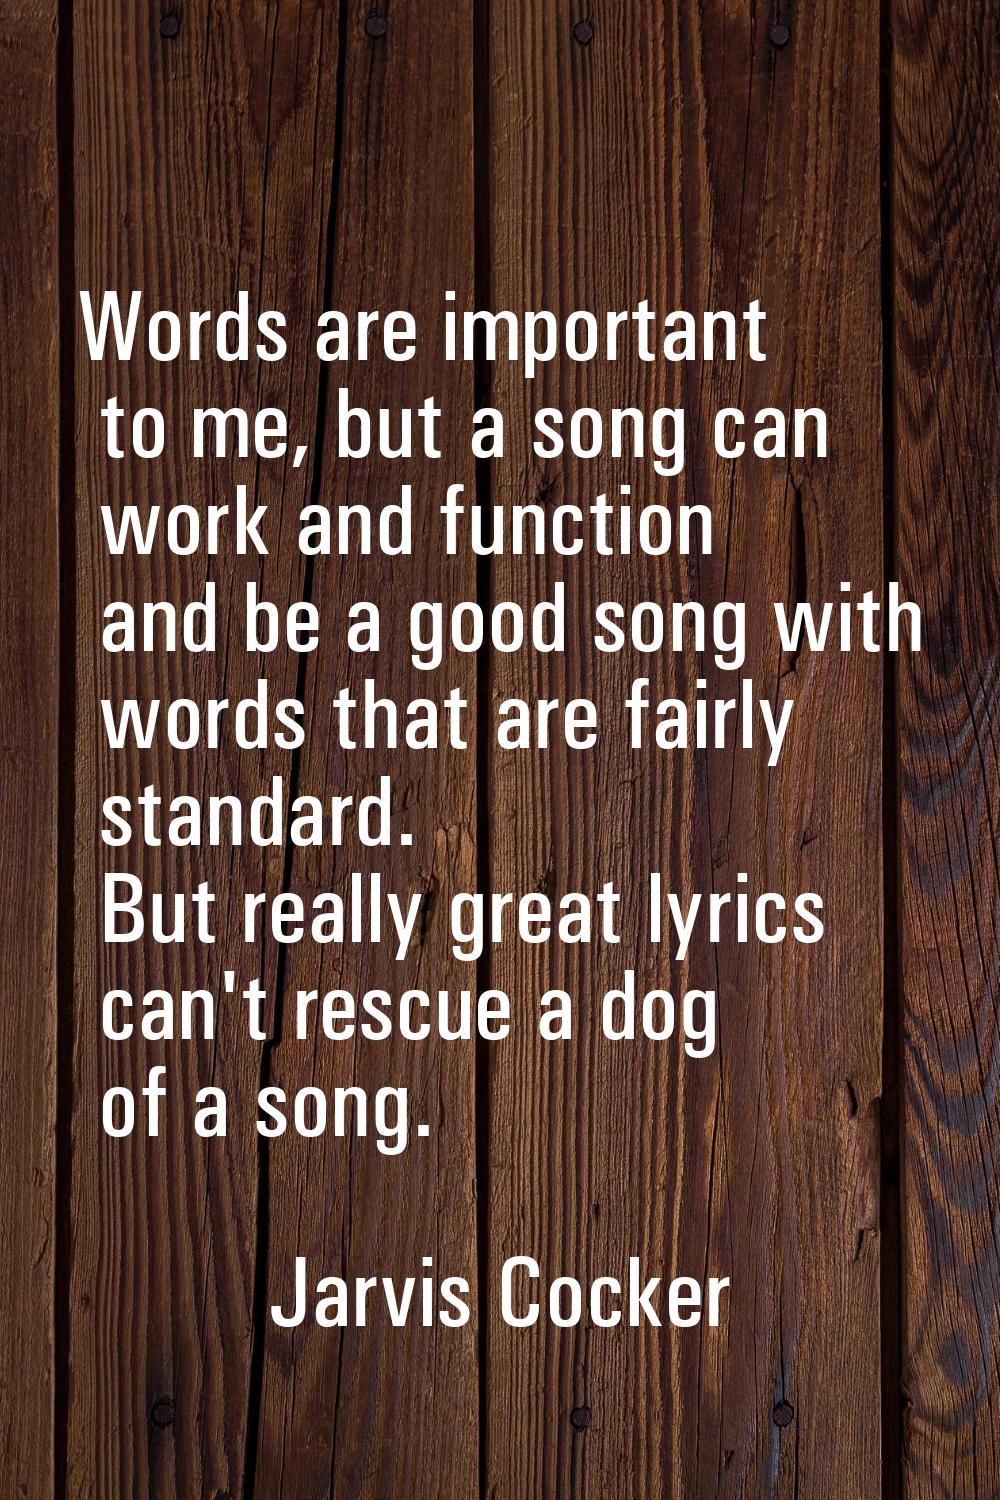 Words are important to me, but a song can work and function and be a good song with words that are 